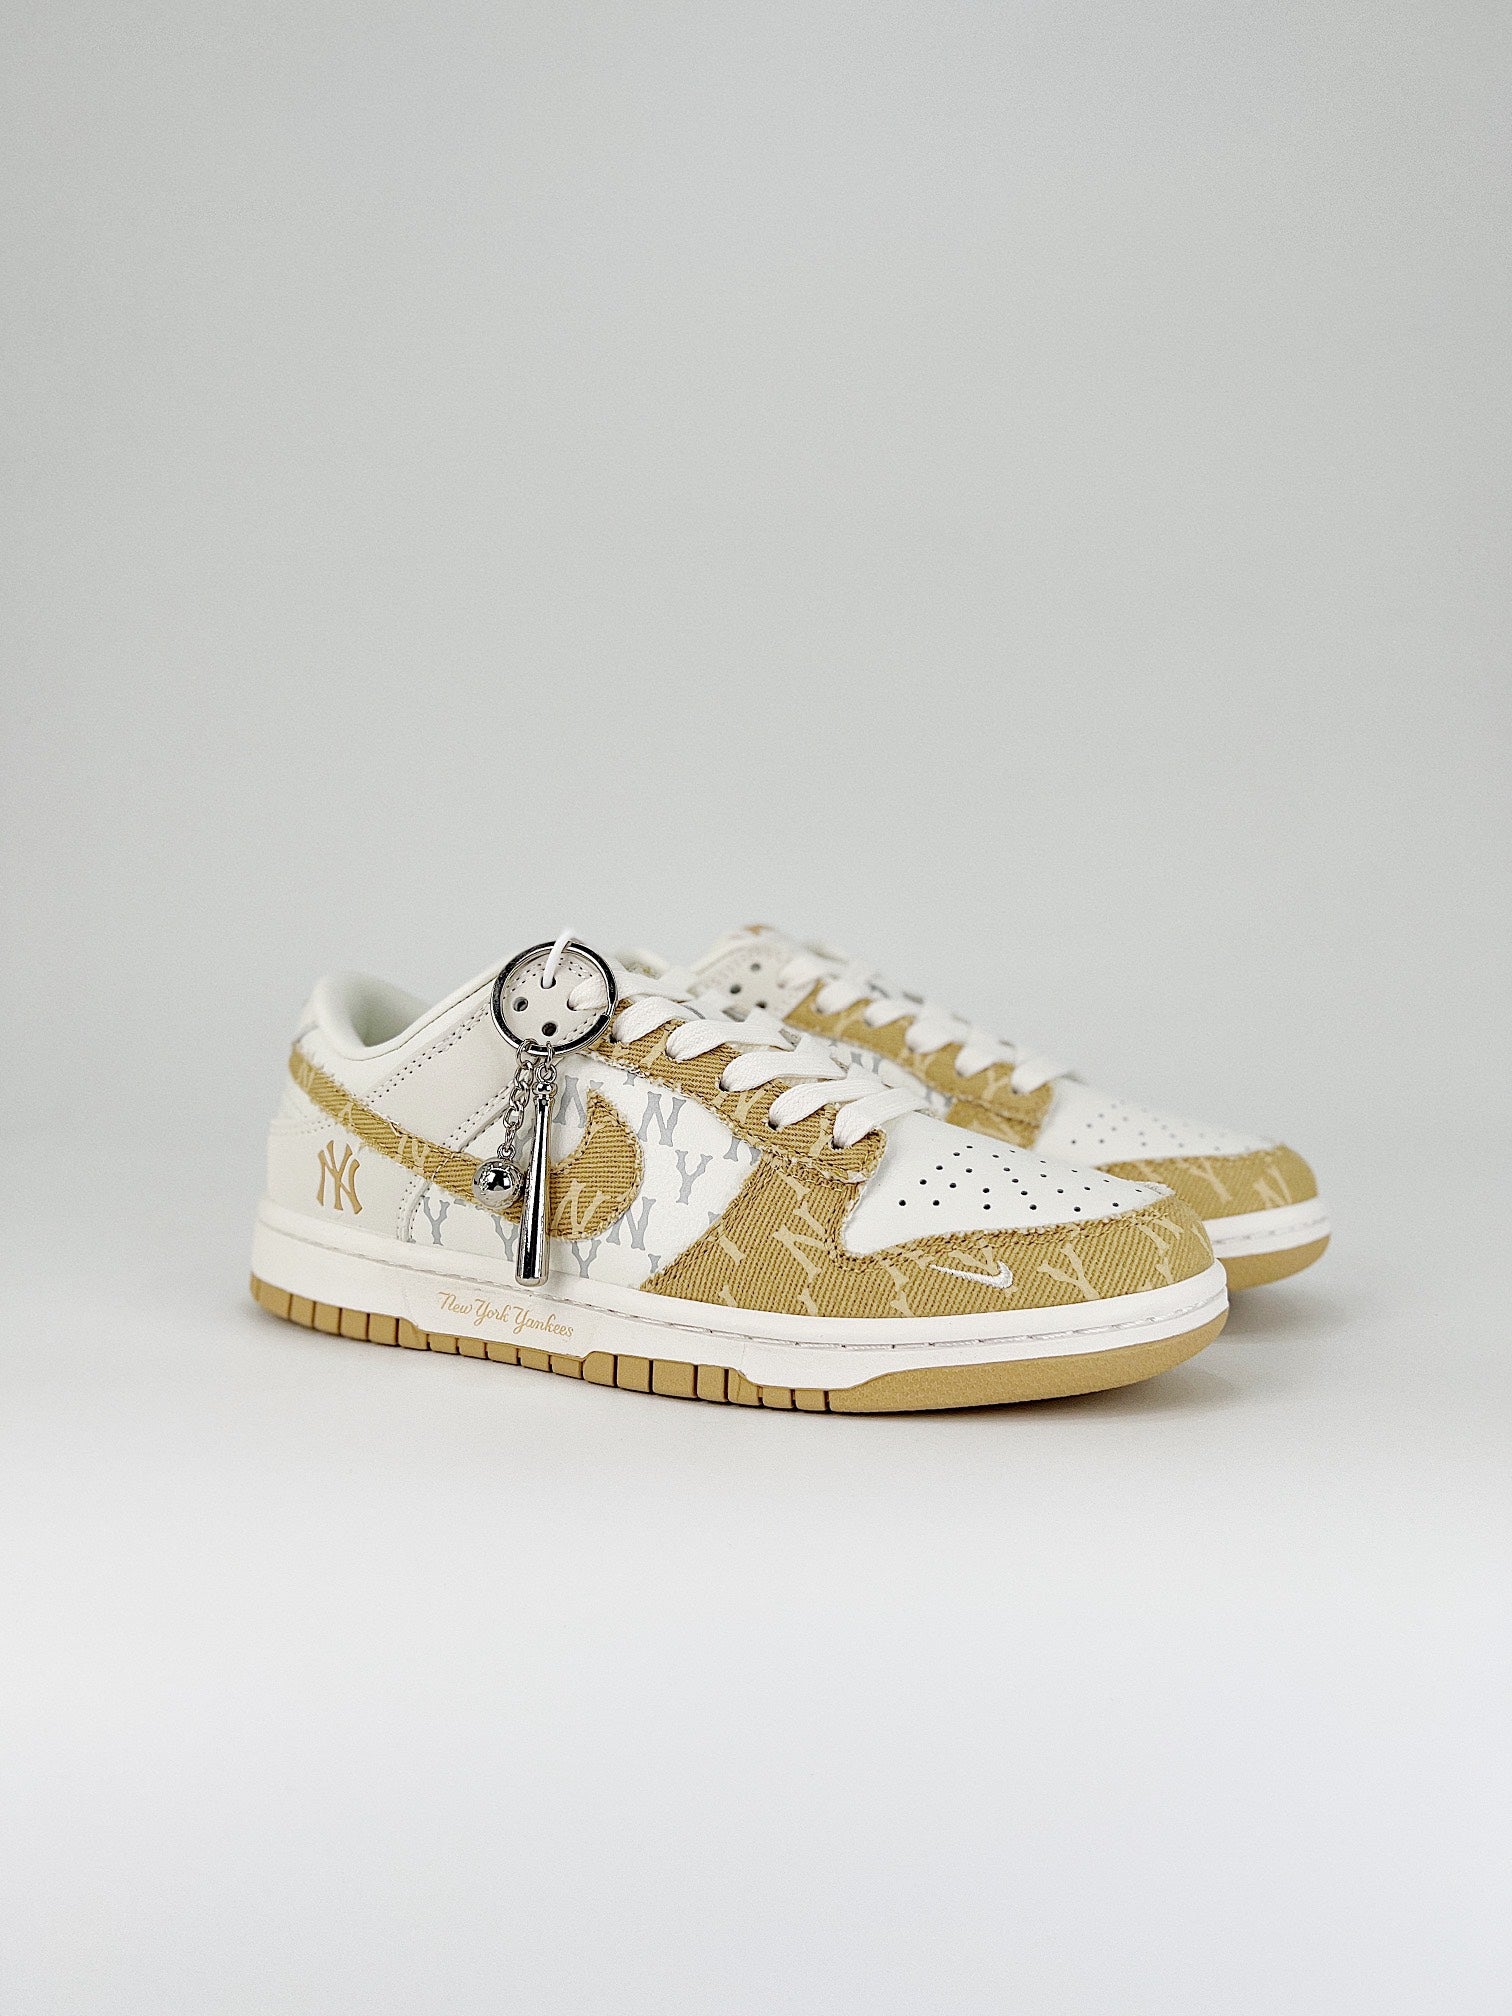 Nike SB Dunk low beige and white